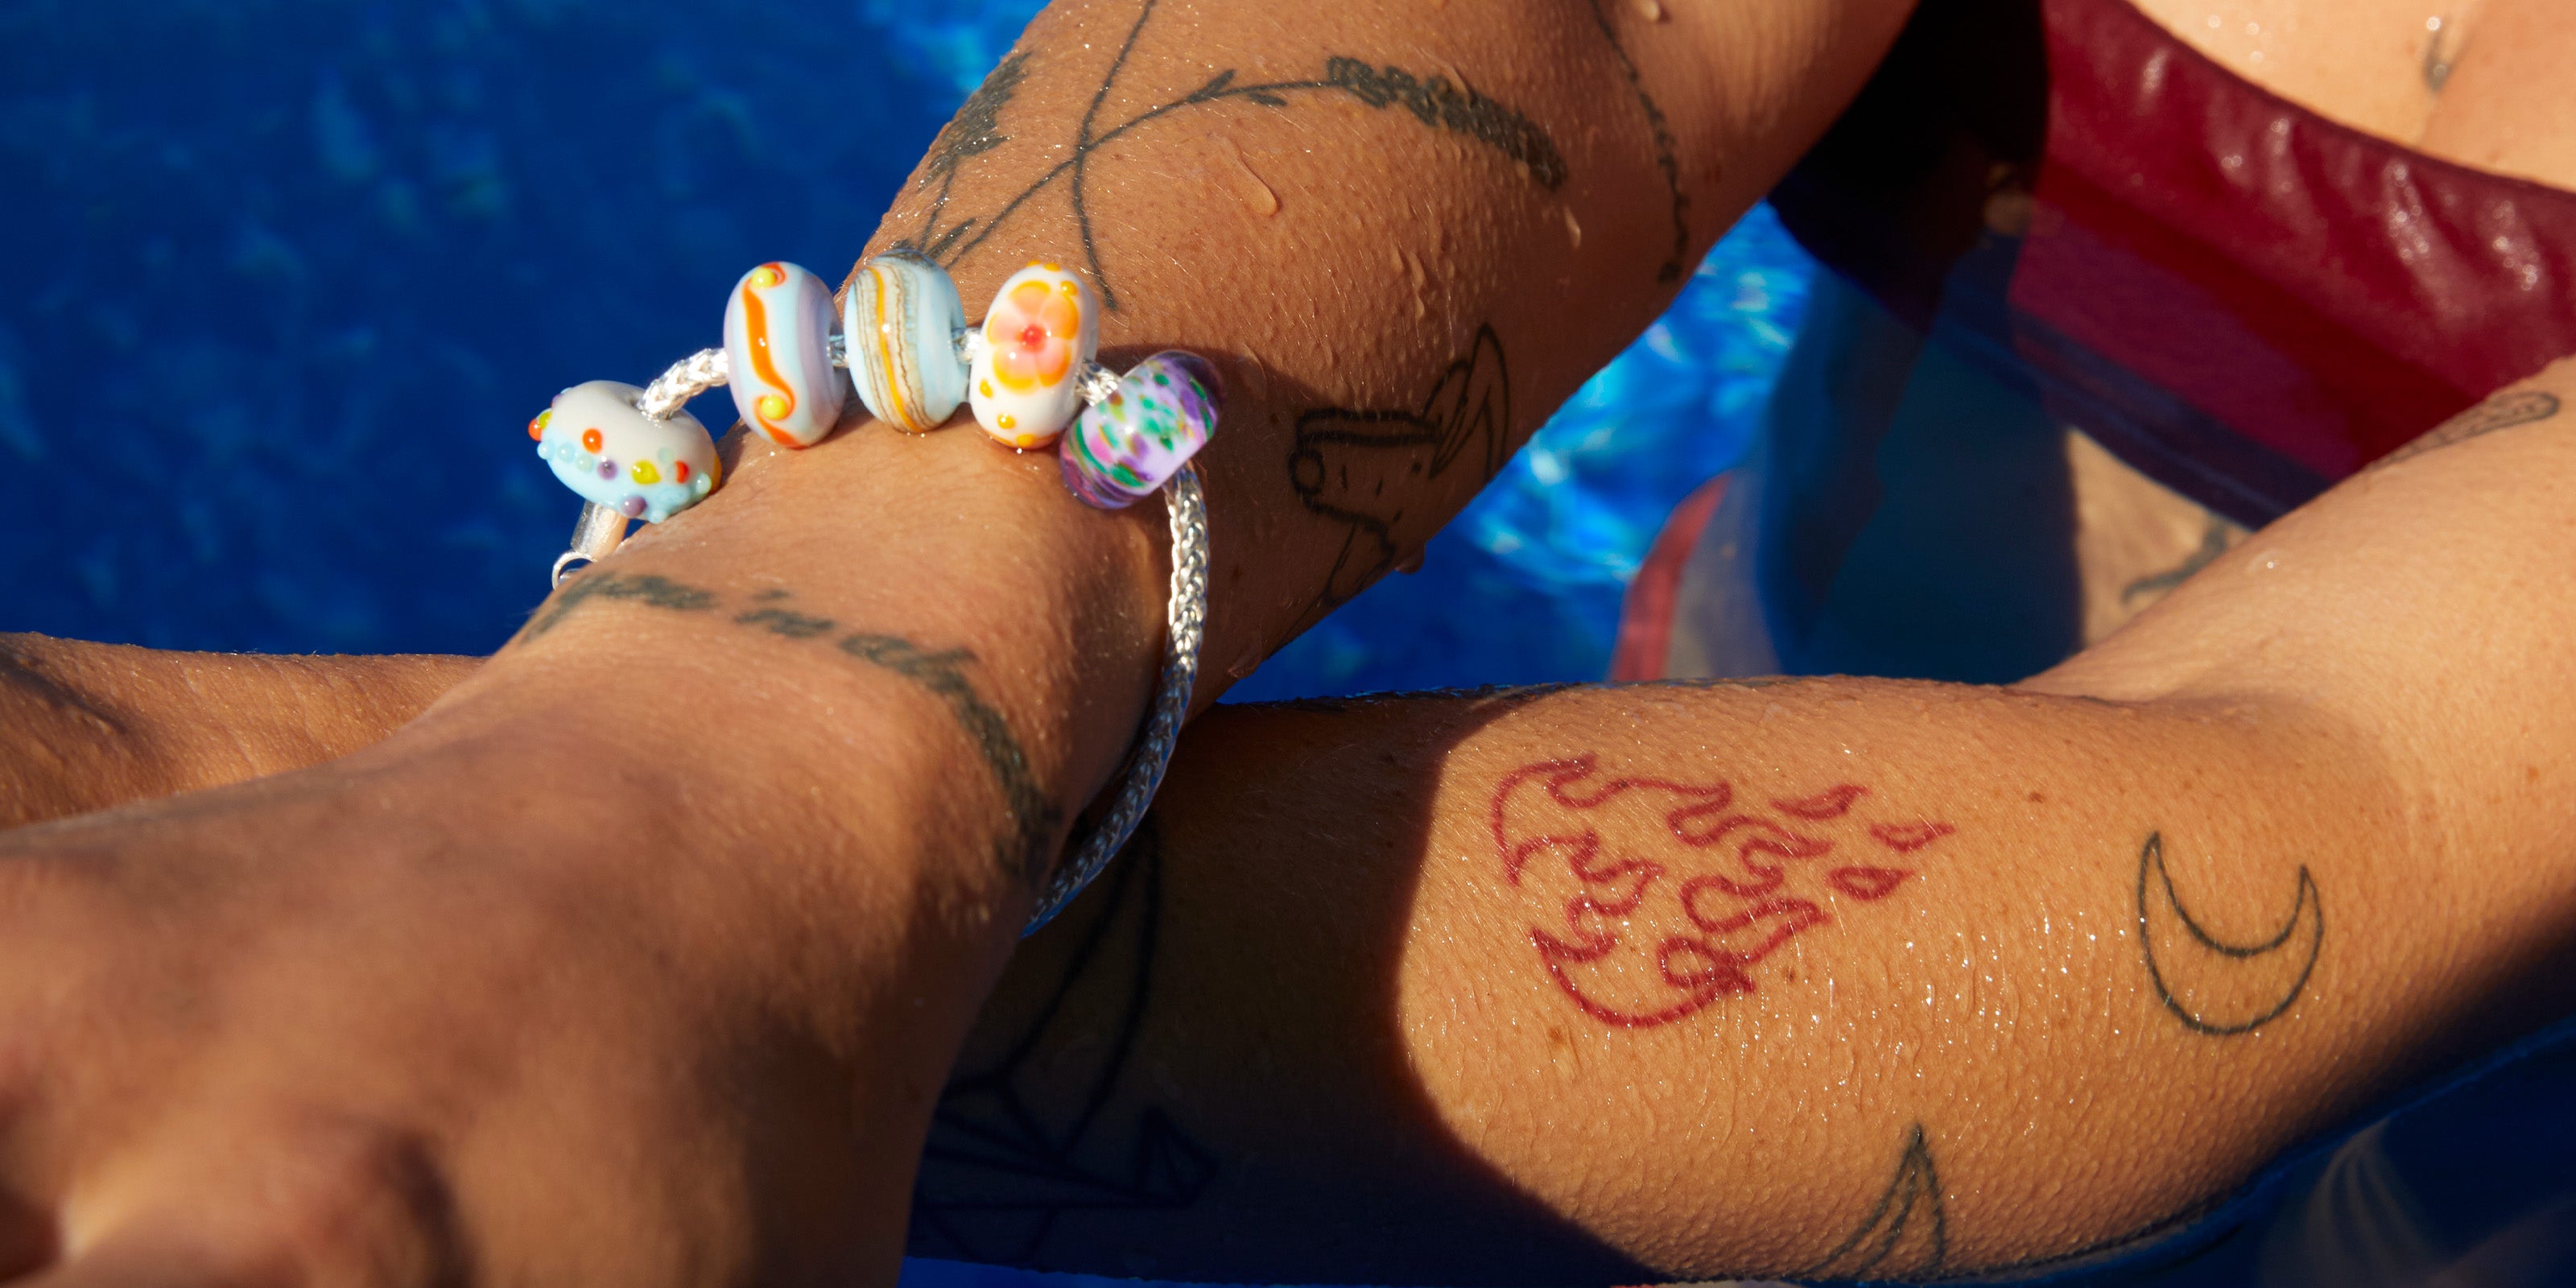 Colourful glass beads on silver tulang naga bracelet worn by woman in pool on holiday.